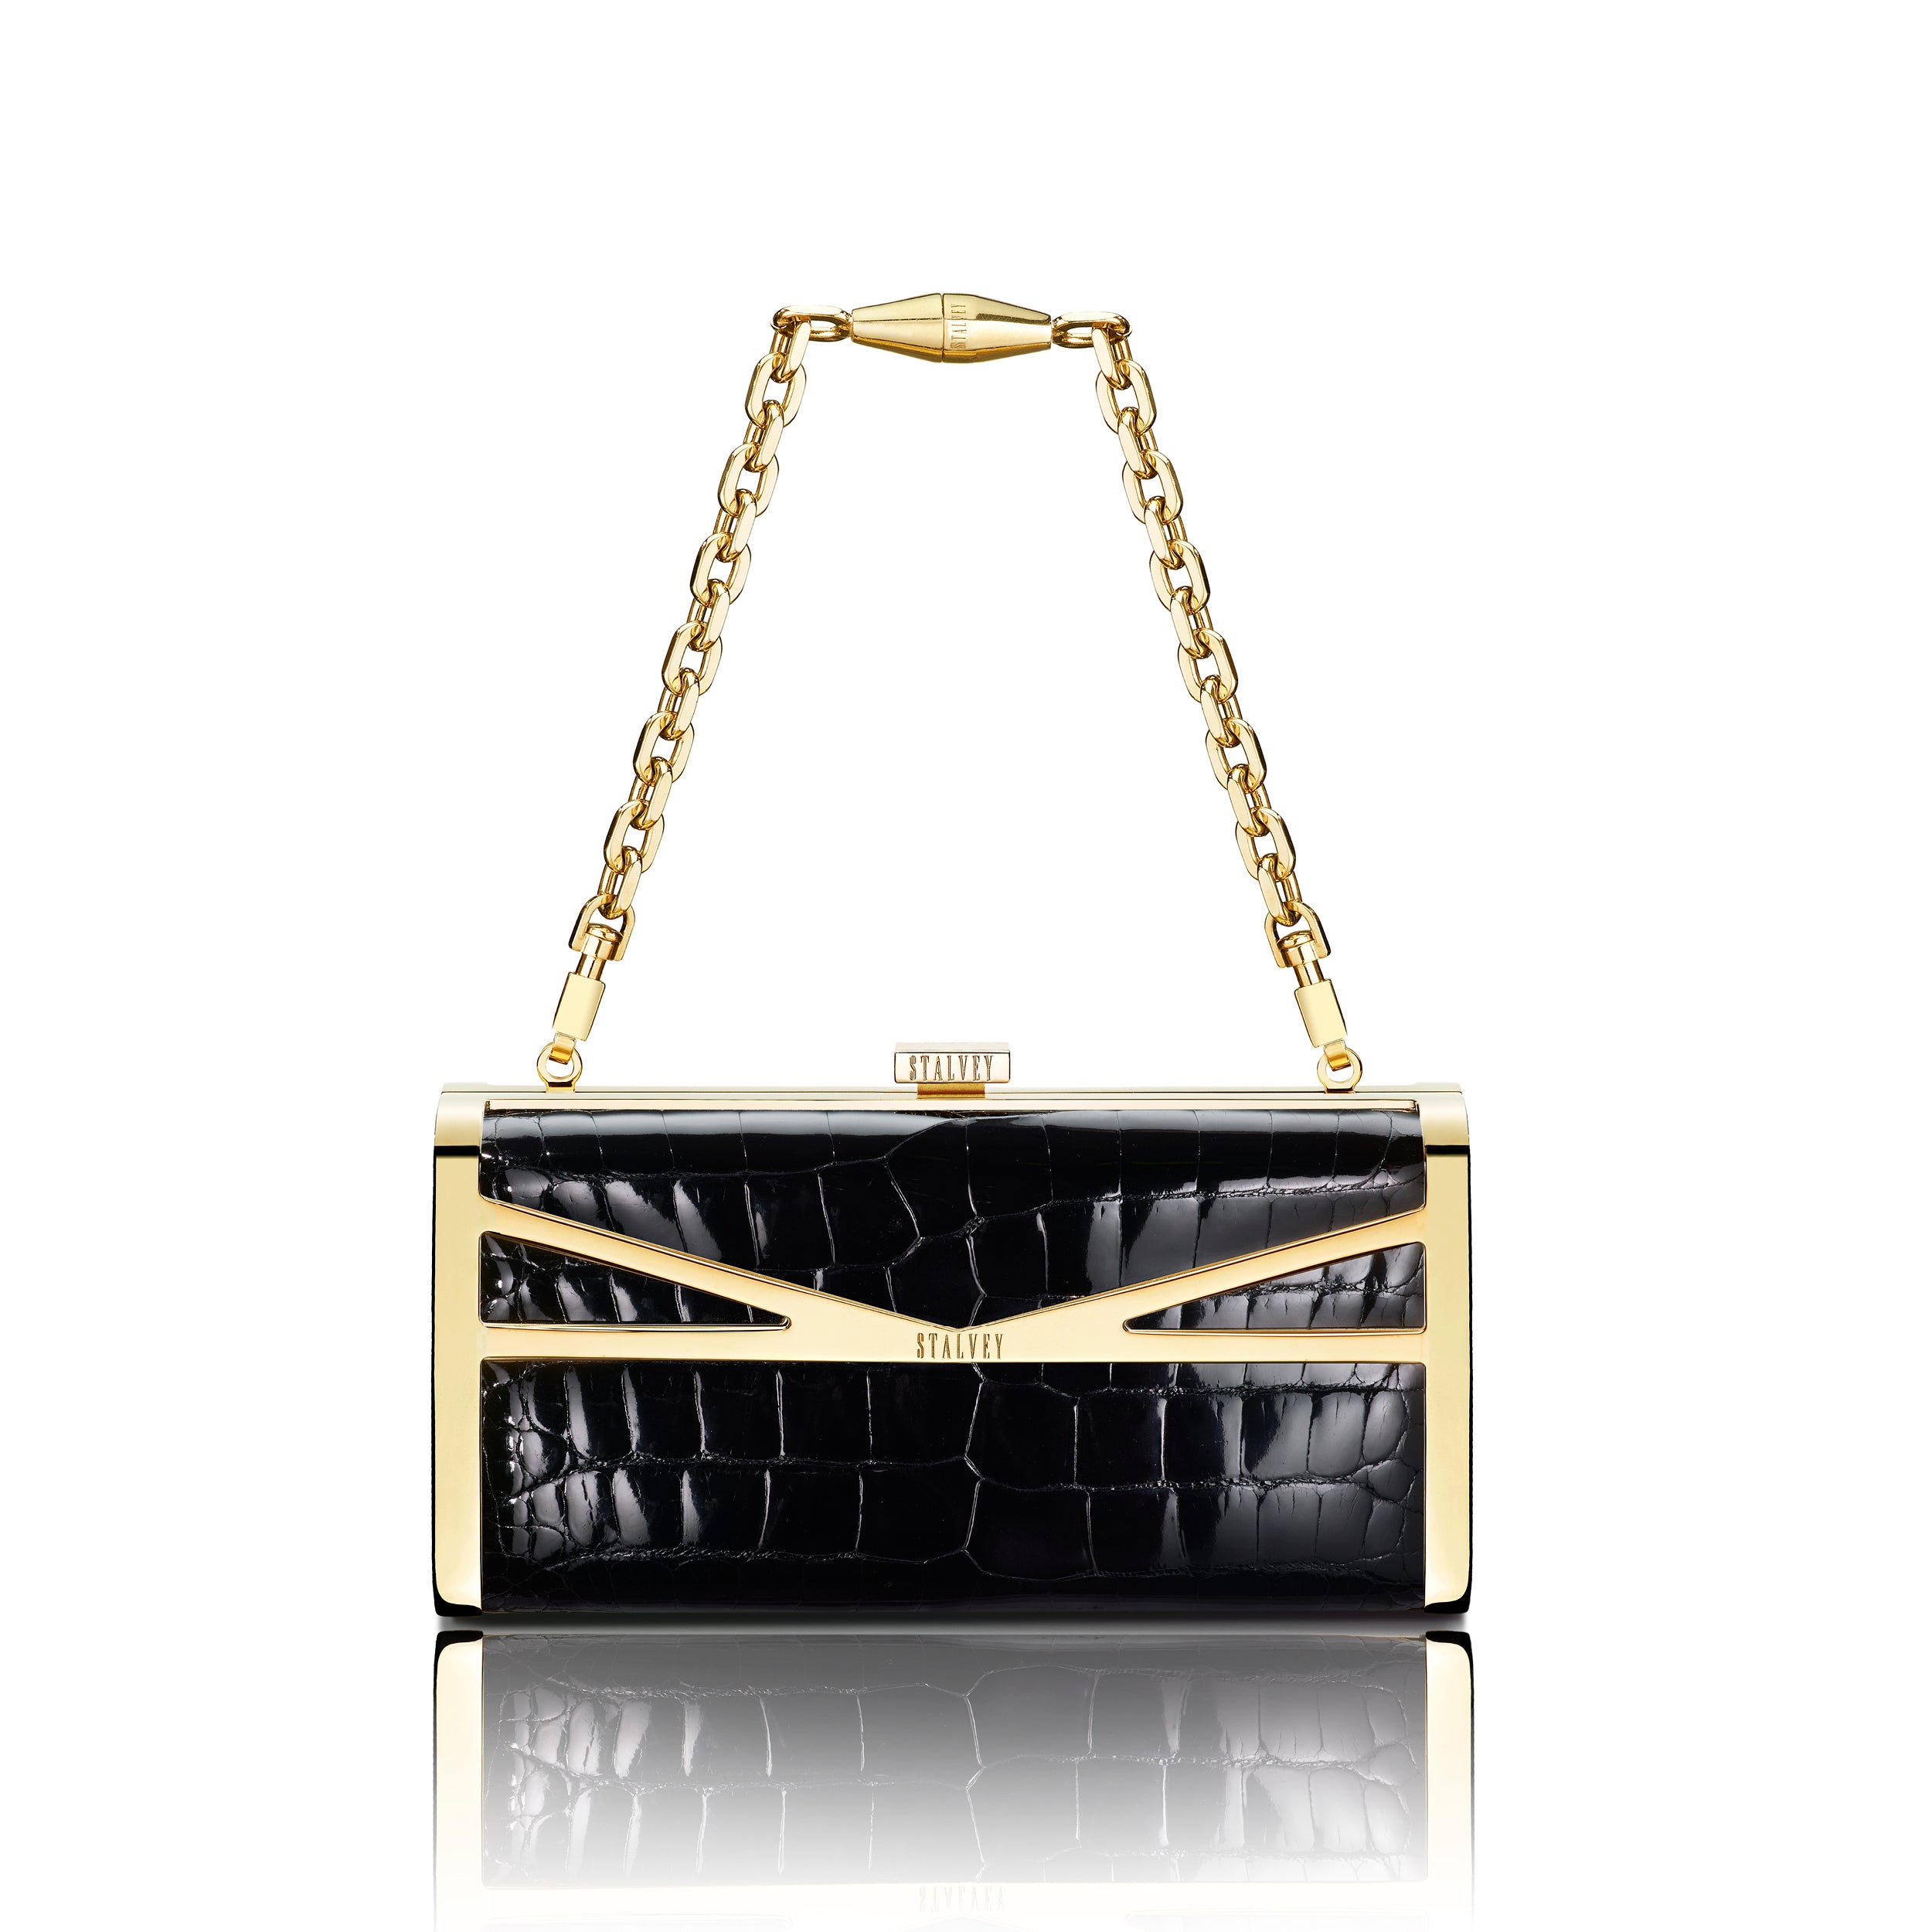 STALVEY Square Clutch in Black Alligator with 24kt Gold Hardware Front View with Chain